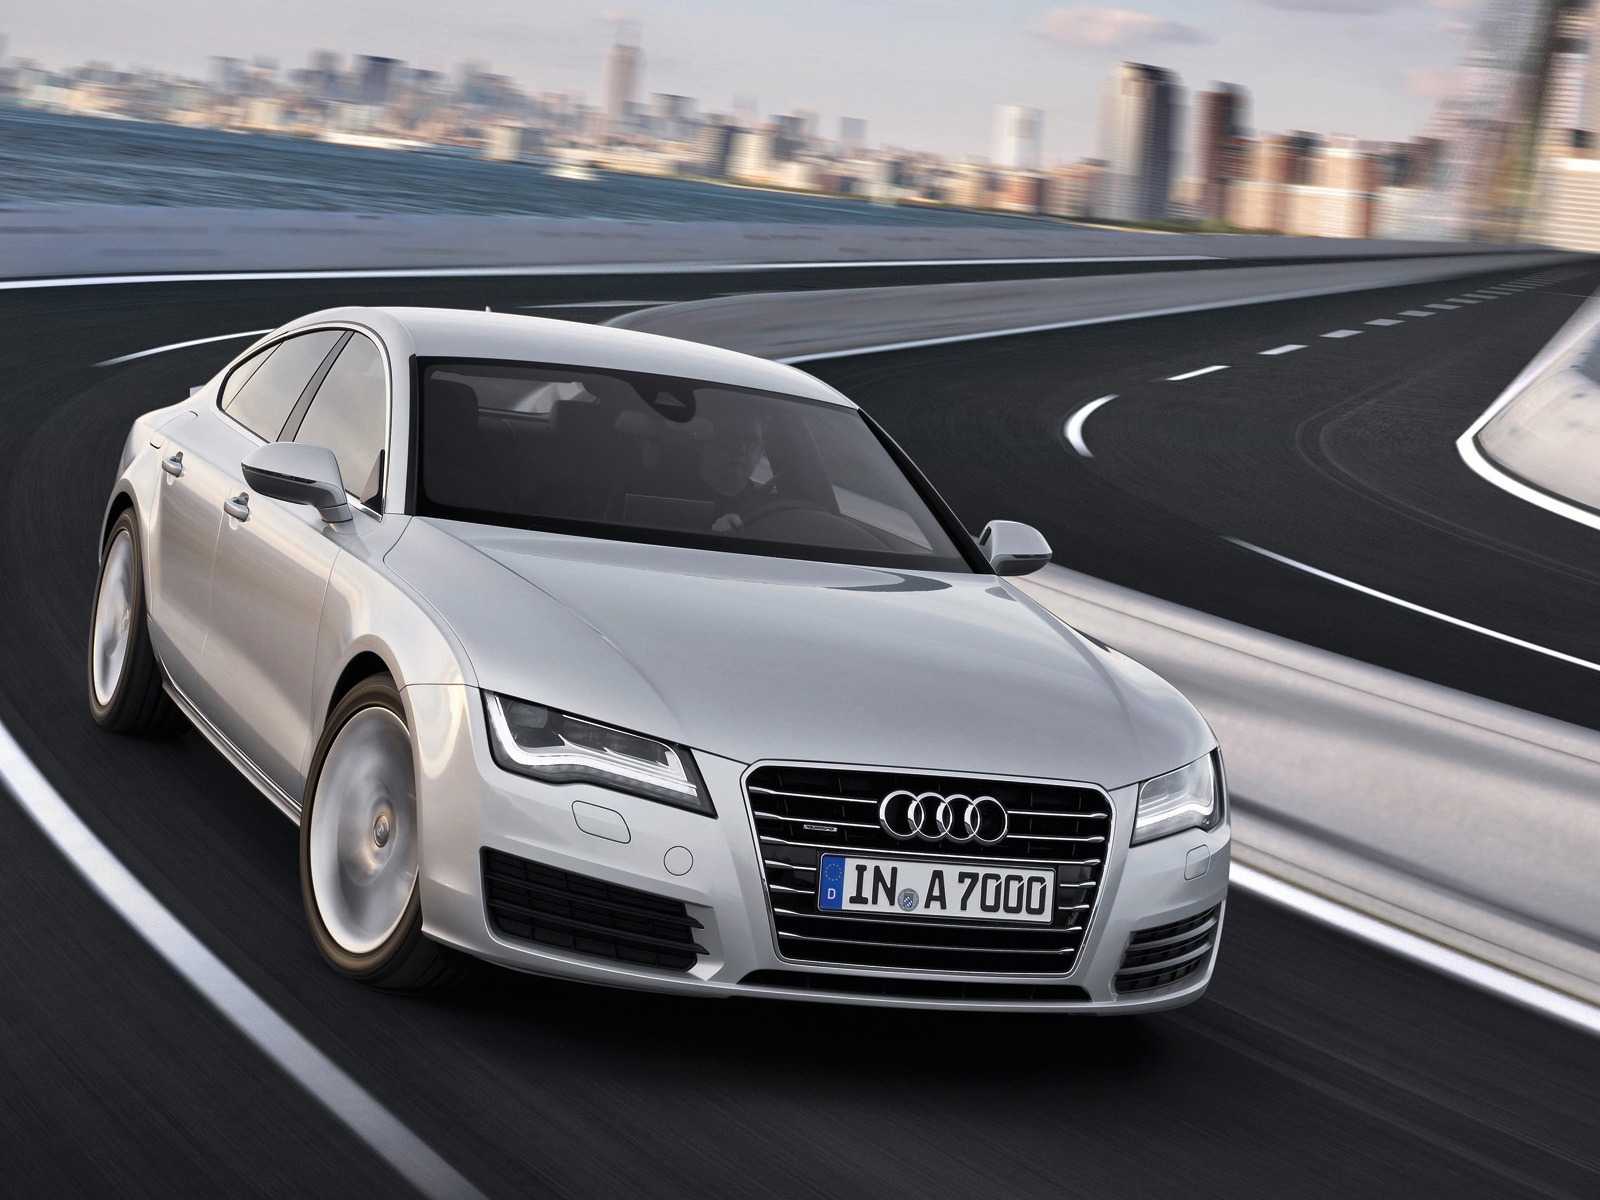 Audi A7 Sportback Speed for 1600 x 1200 resolution